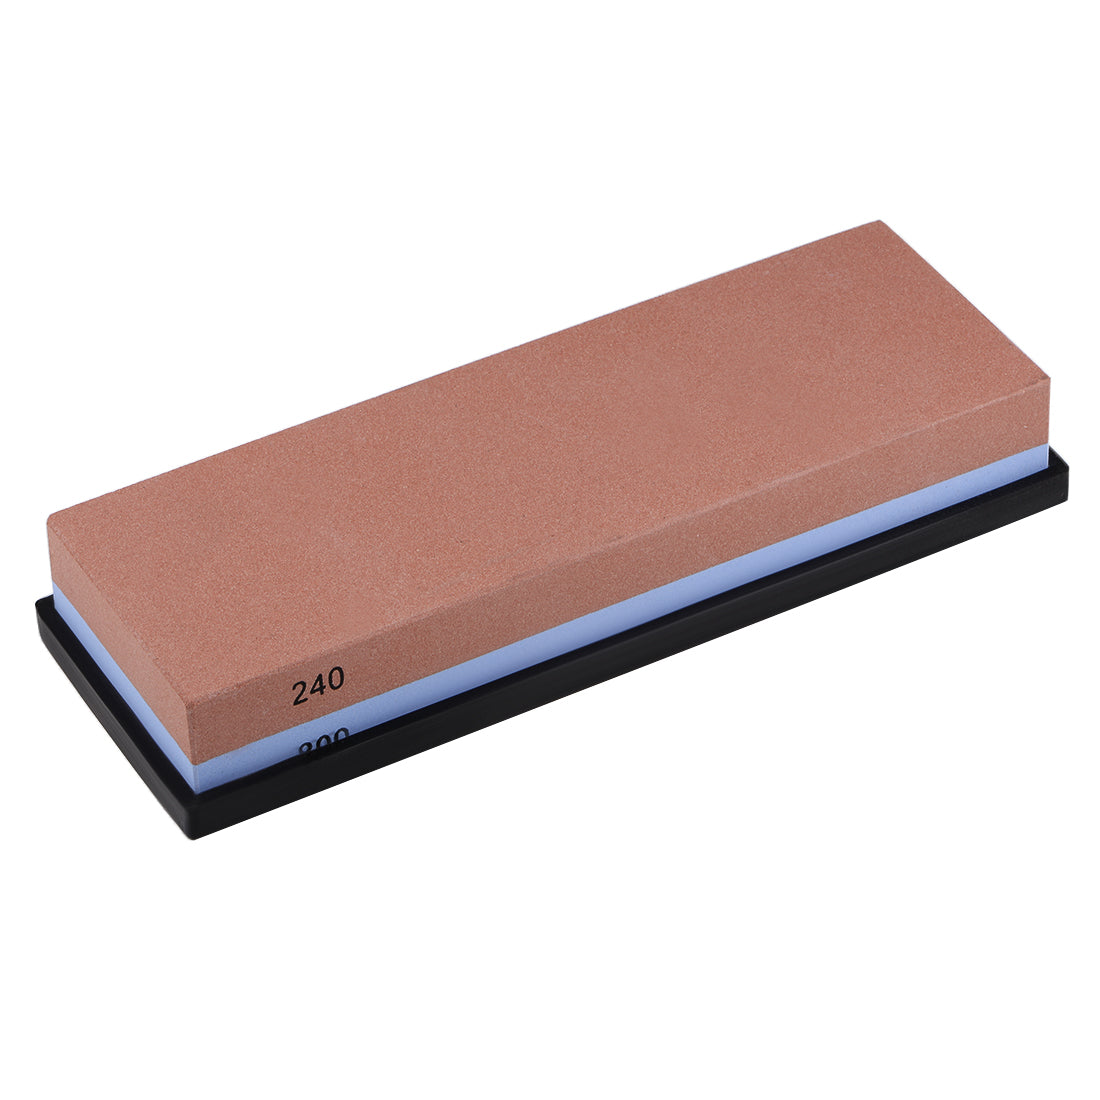 uxcell Uxcell Double-Sided Whetstone Knives Sharpener Sharpening Stone 240/800 Grit for Scissors Razors Carving Tool